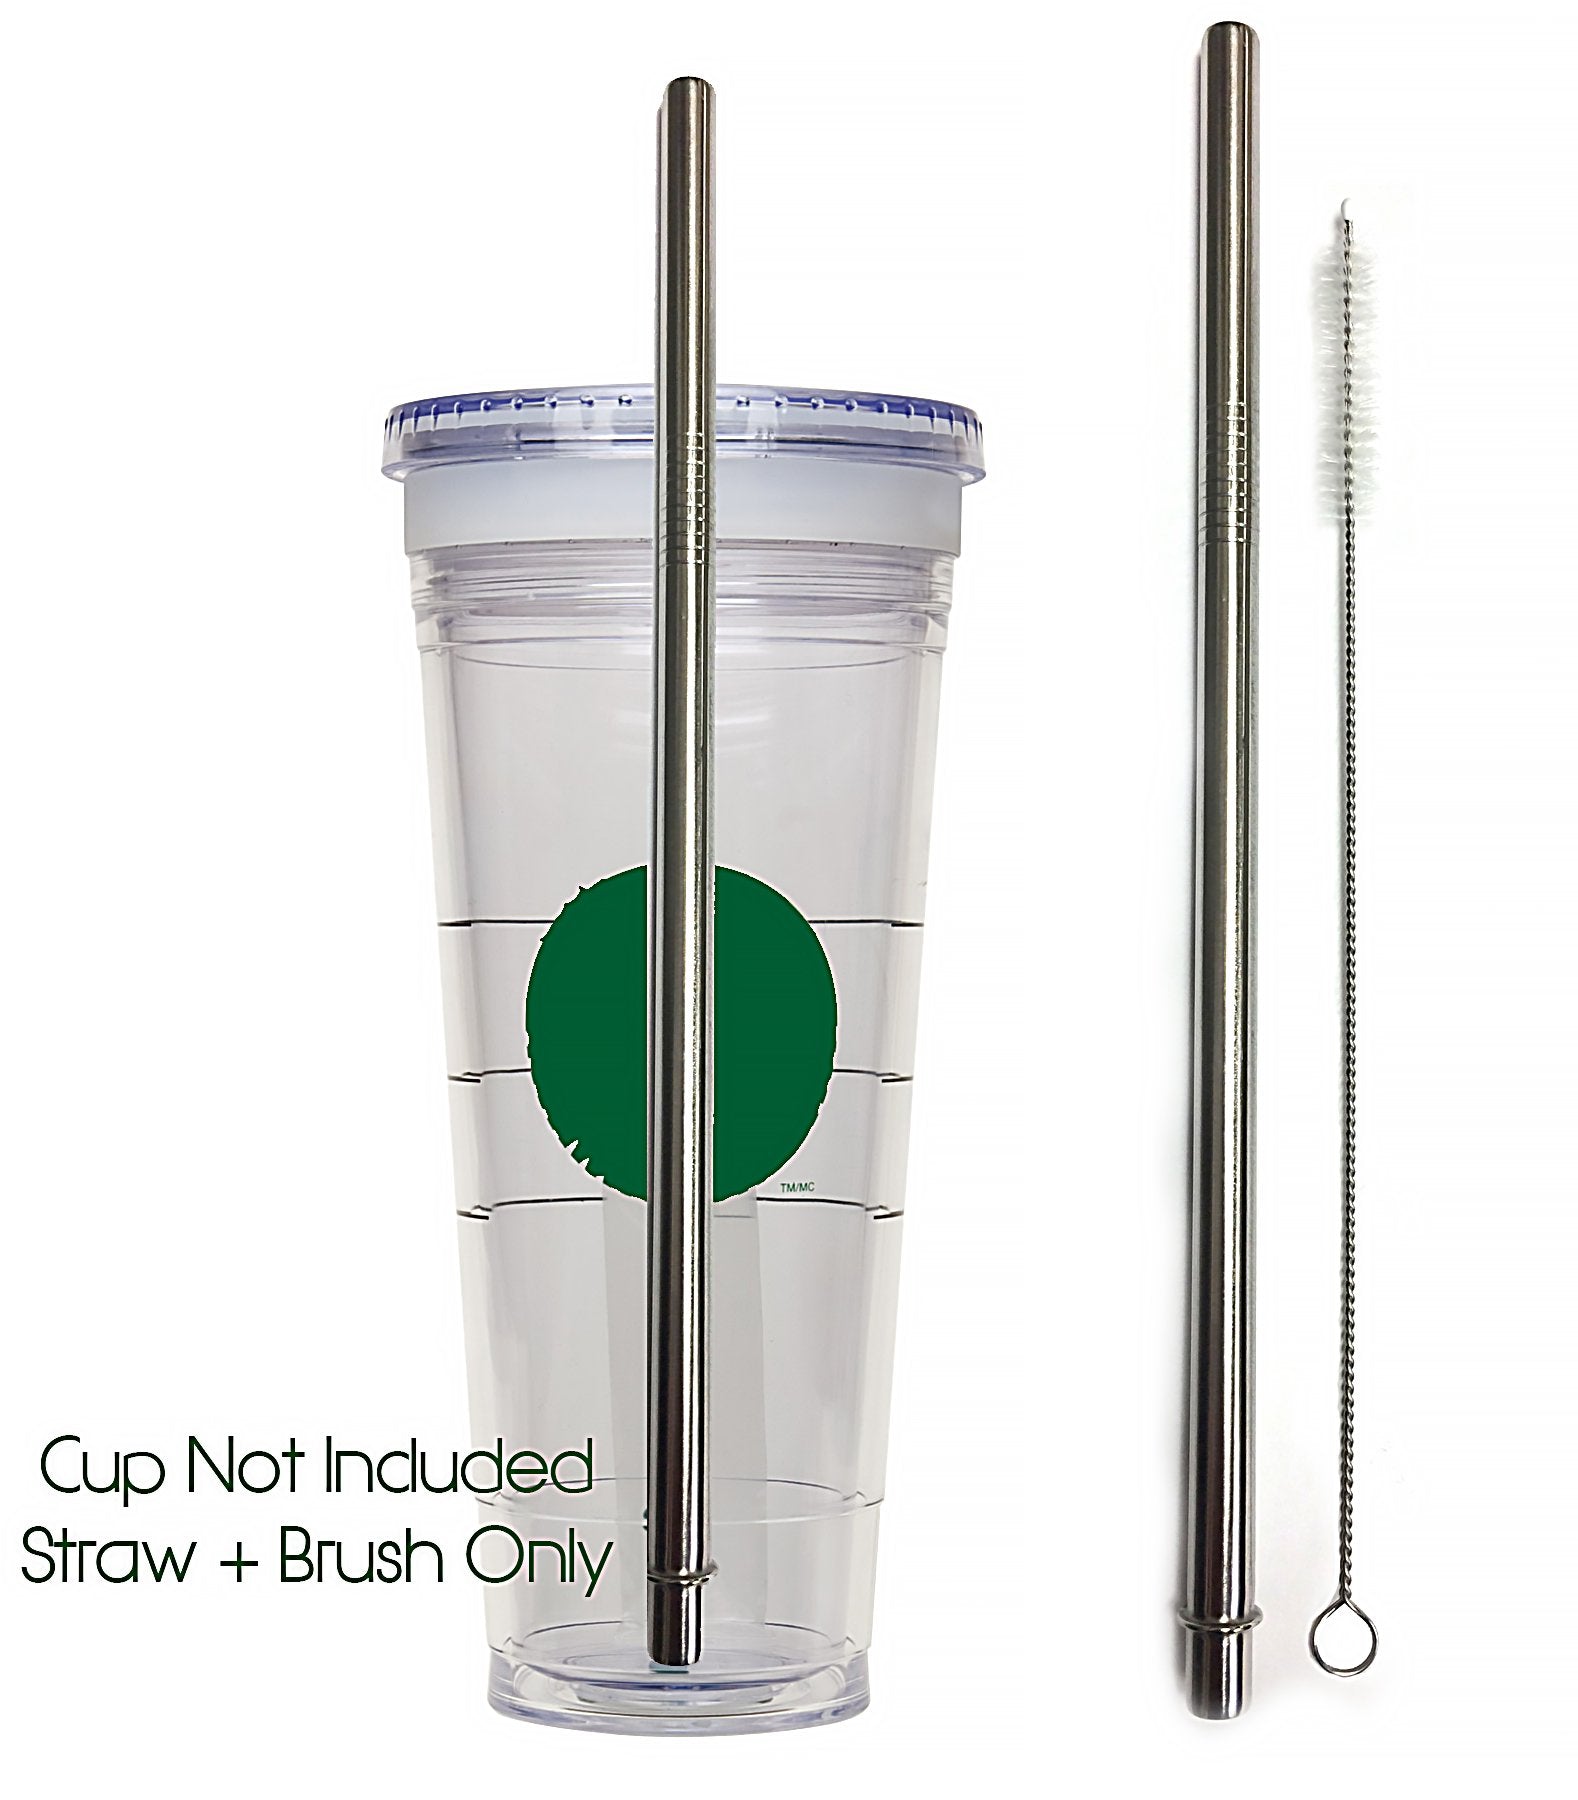 Stainless Steel Grande Replacement Straw Cold Cup To-Go Reusable Drink Straws Non-Plastic"Green" Eco Friendly CocoStraw Brand